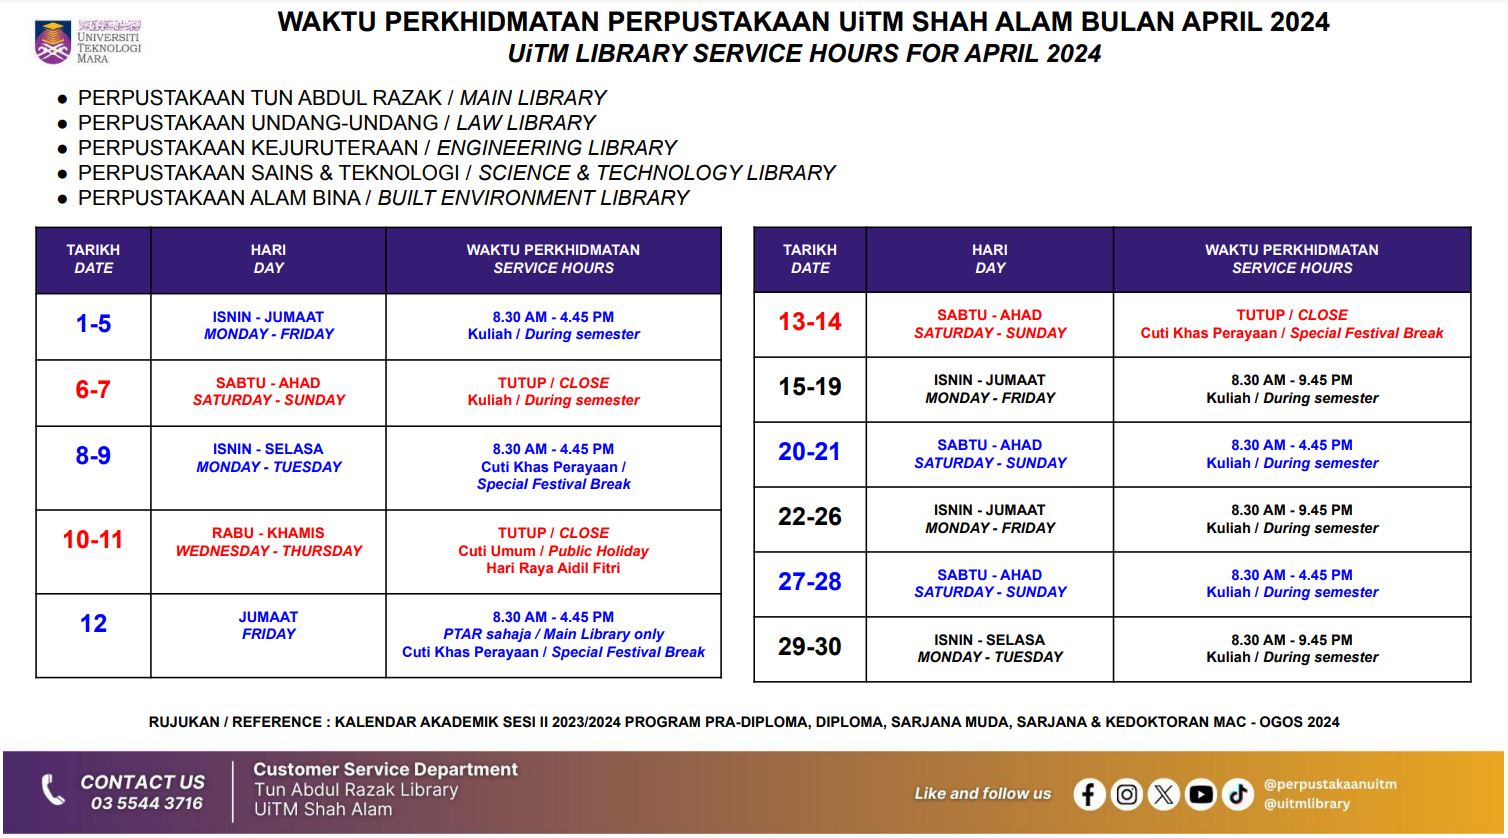 Library Opening Hours for April